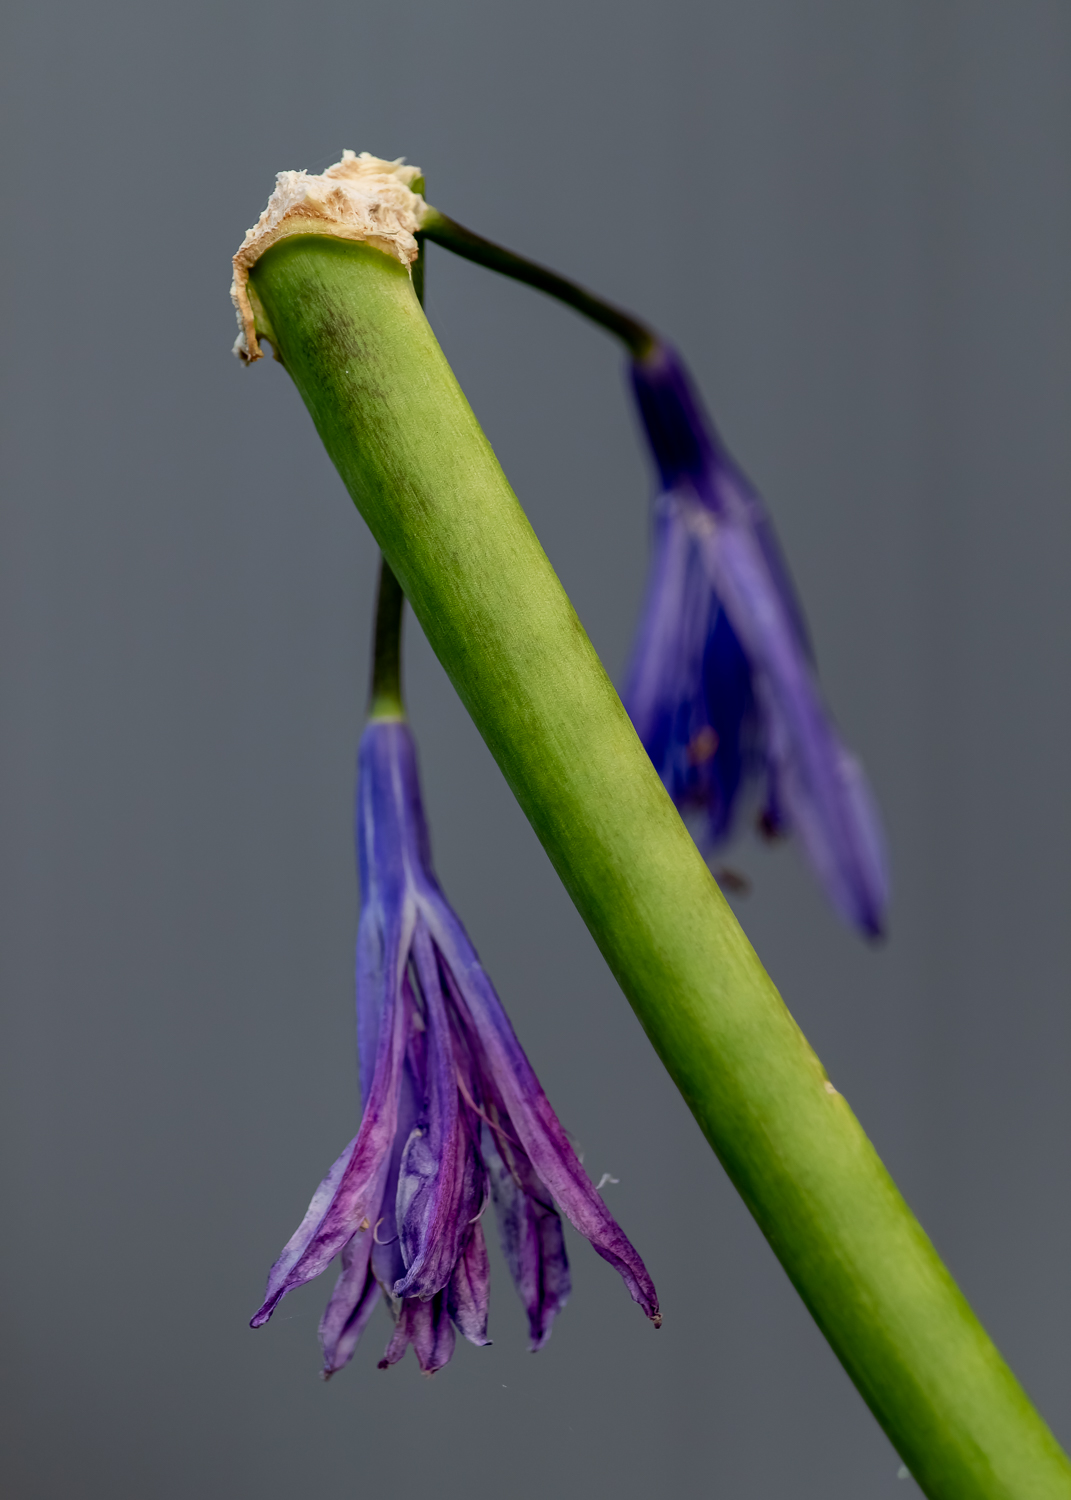 Two flowerlets of a purple agapanthus clinging to a broken stem